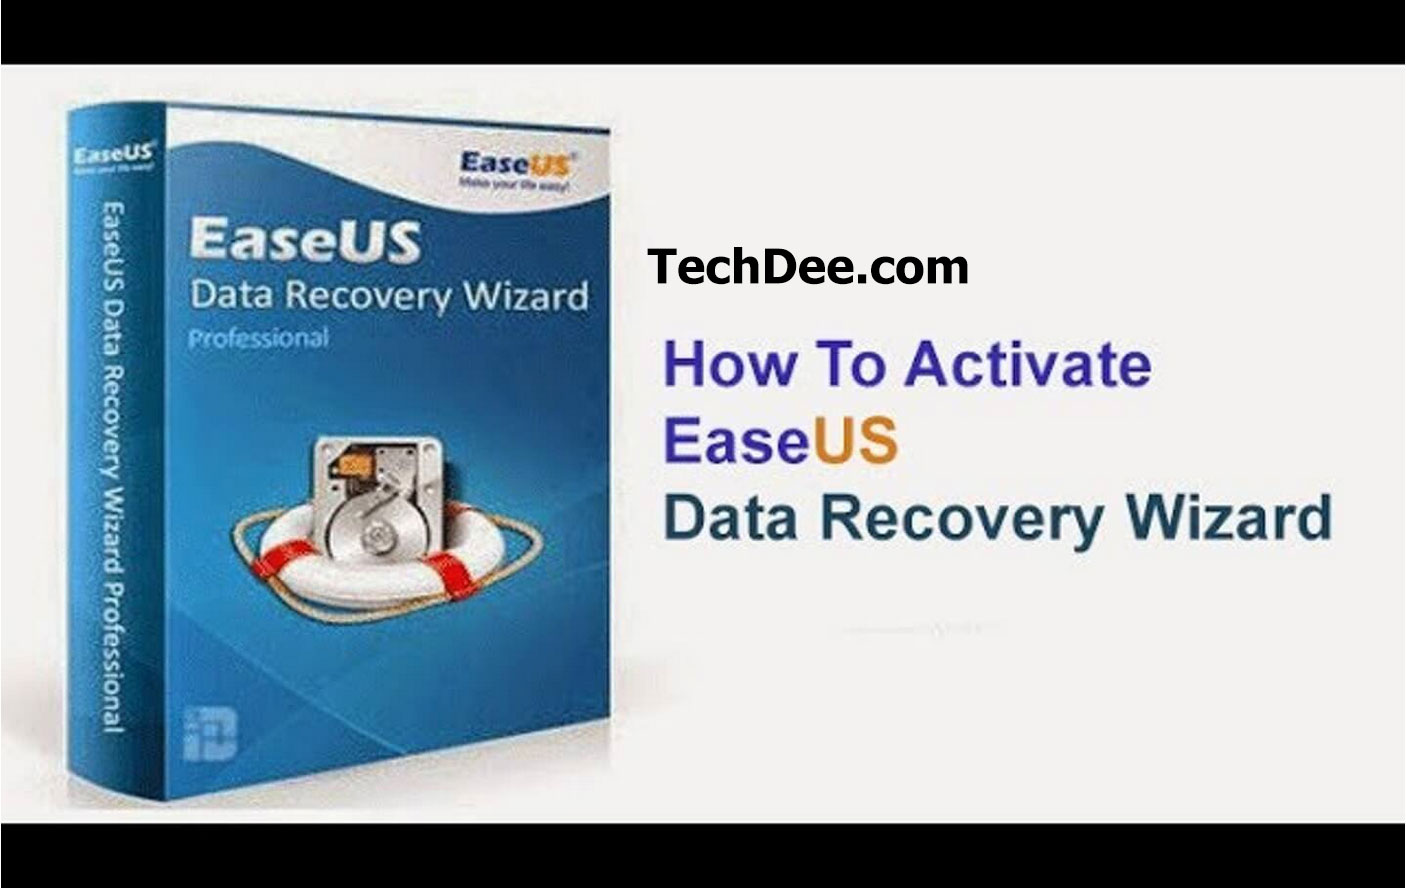 Easeus data recovery wizard 12 serial key lpseogpseo